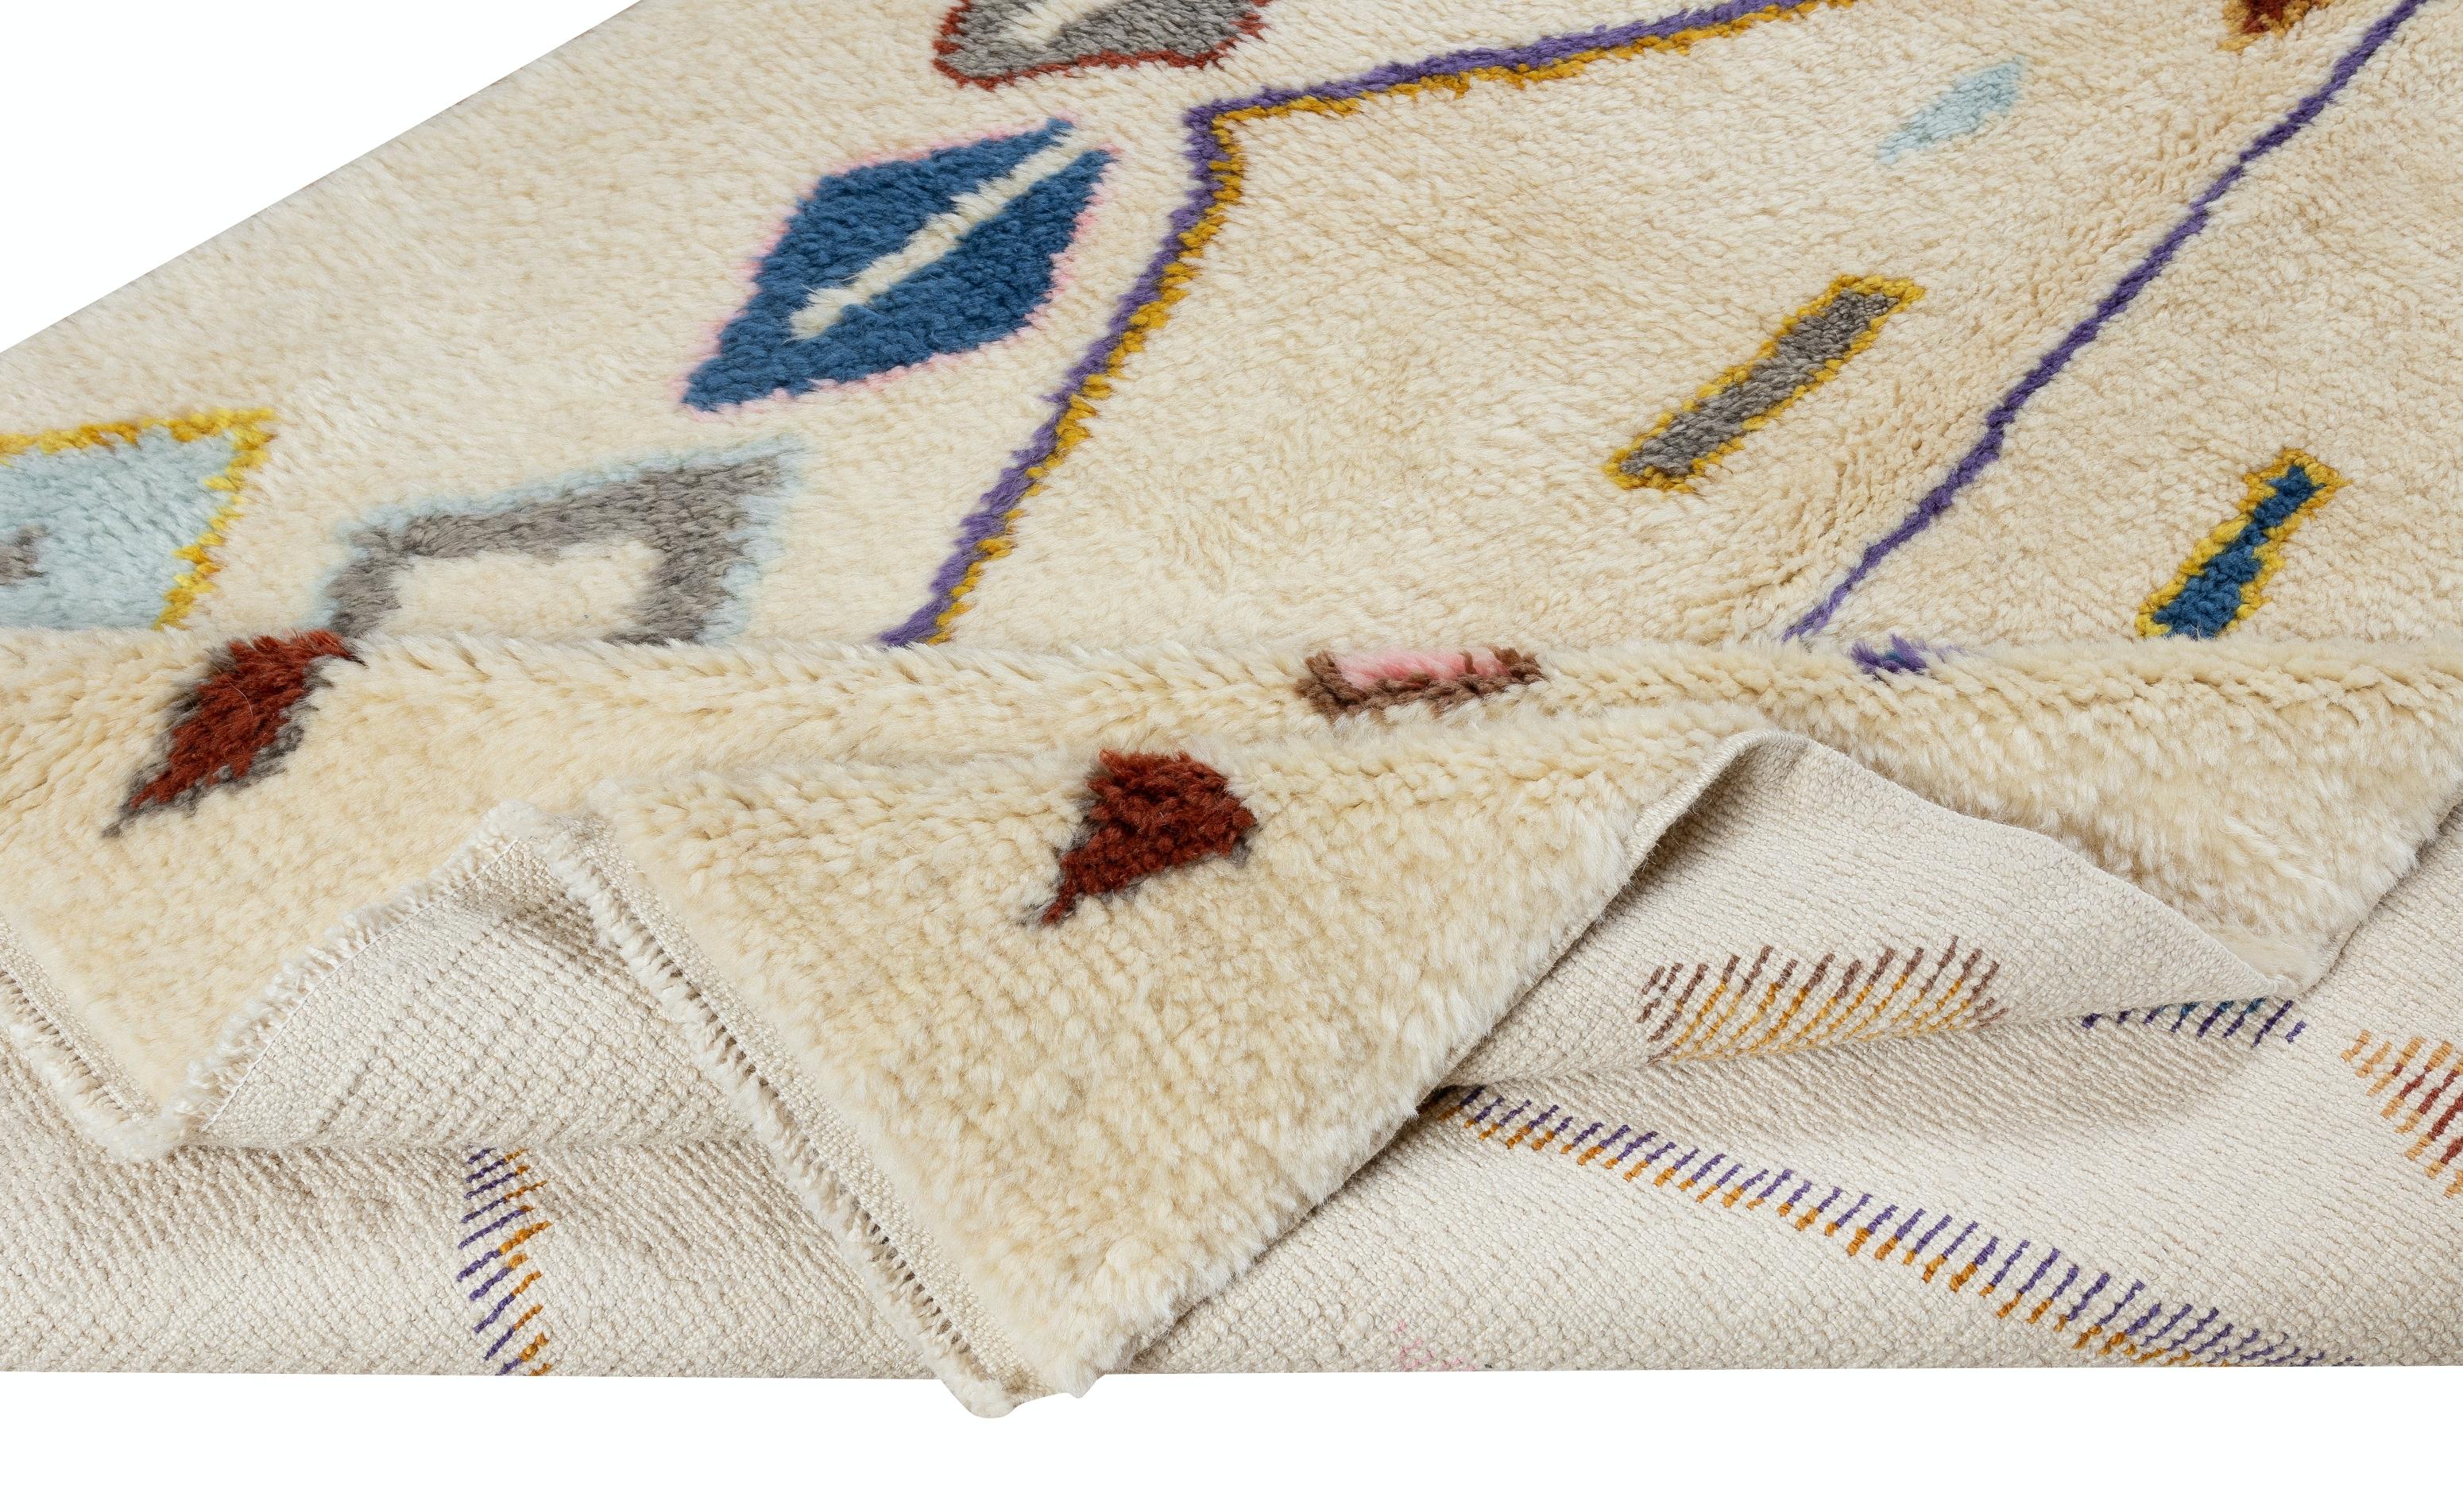 An exquisite brand-new Moroccan tulu rug hand knotted from fine hand-spun sheep's wool. A true statement piece that can easily be the focal point of any modern / contemporary or boho chic interiors. Very soft, luxurious, lush pile.

Available in the